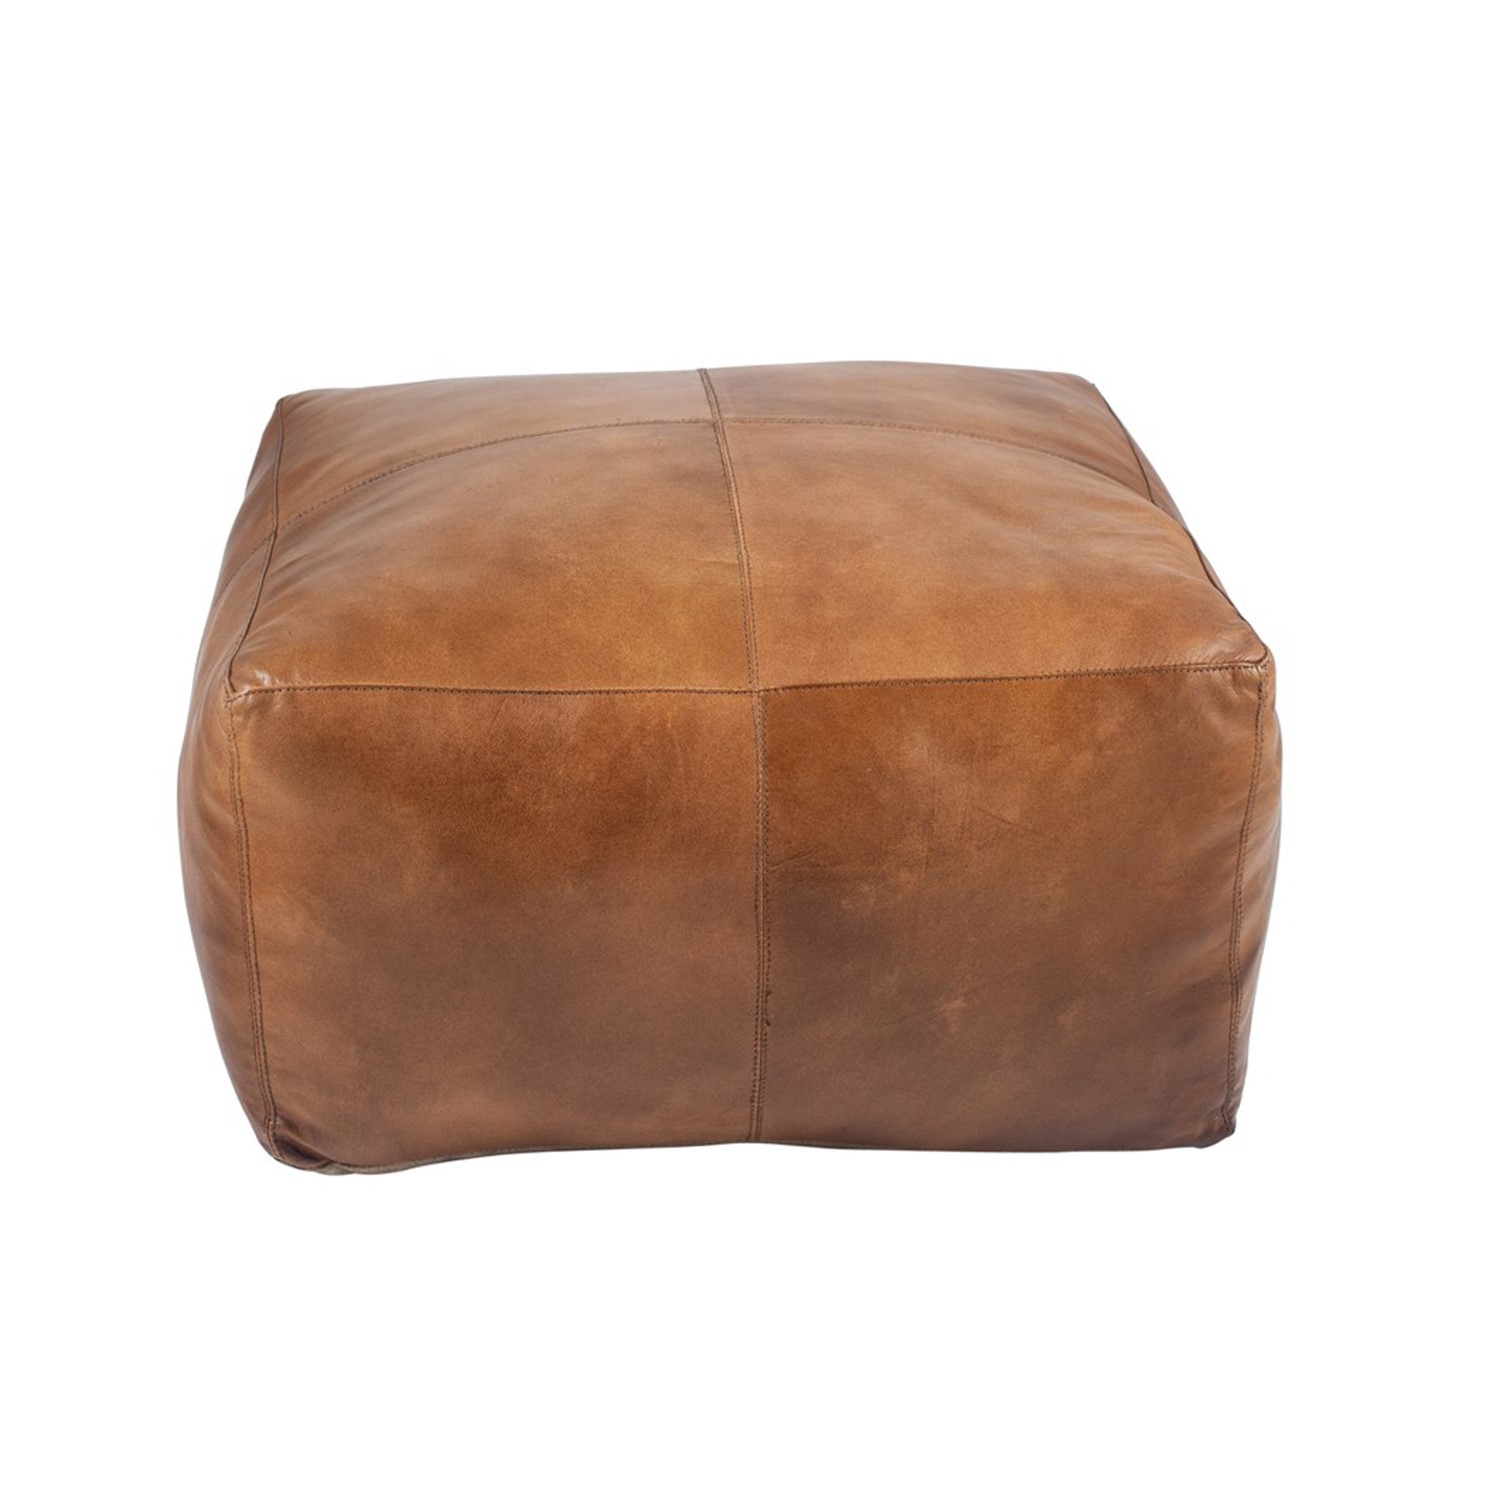 Photo of Small natural tan leather square pouffe